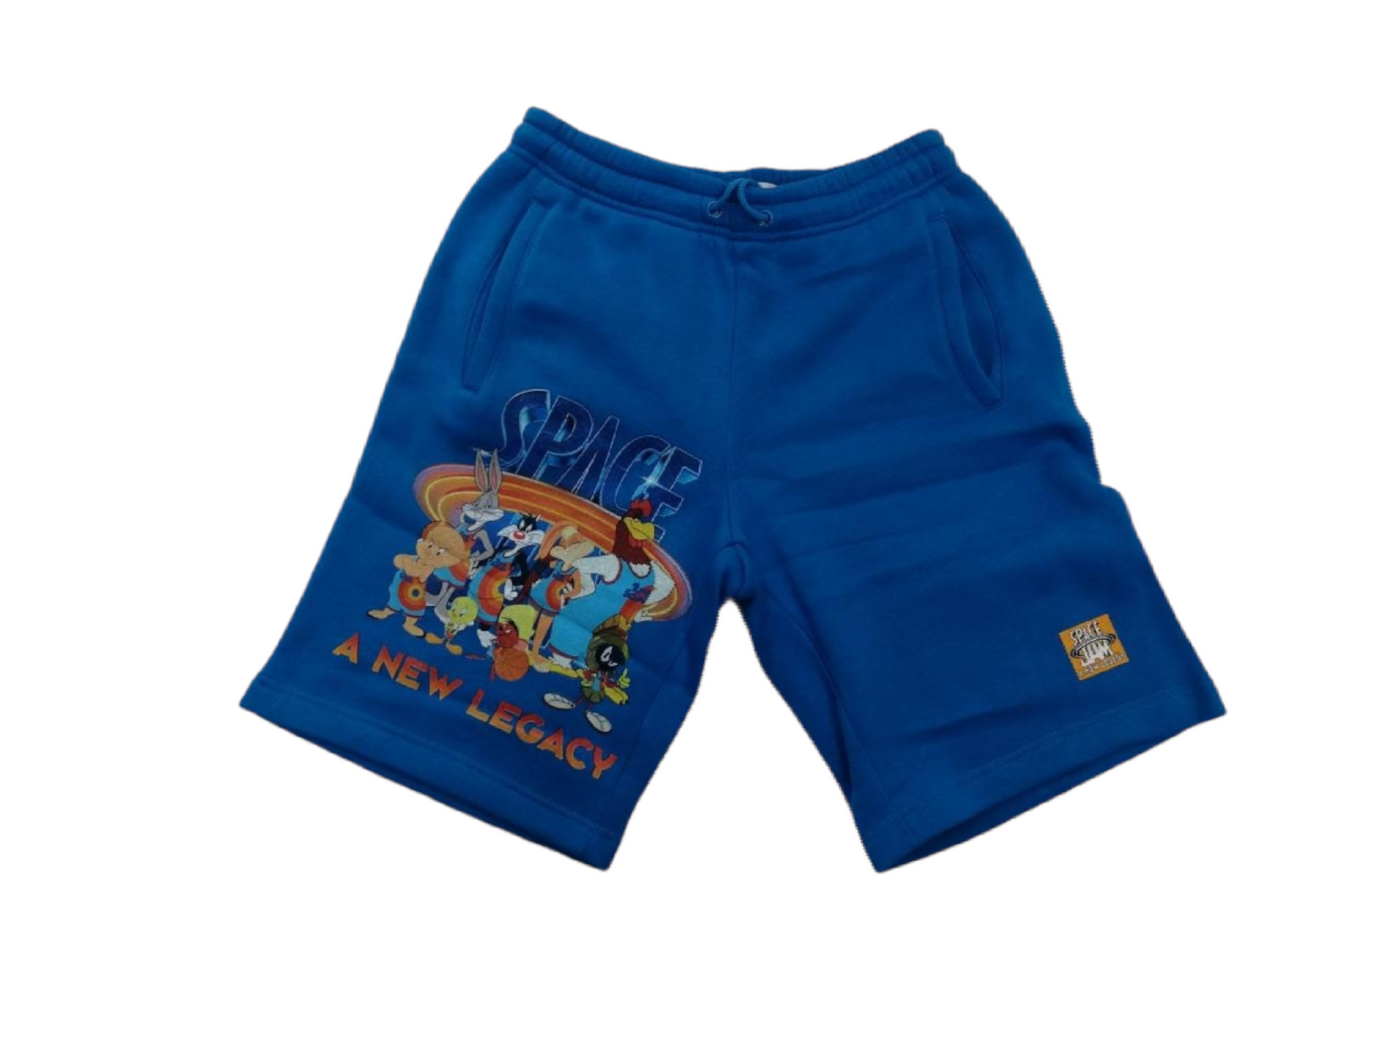 Space Jam A New Legacy Shorts Blue